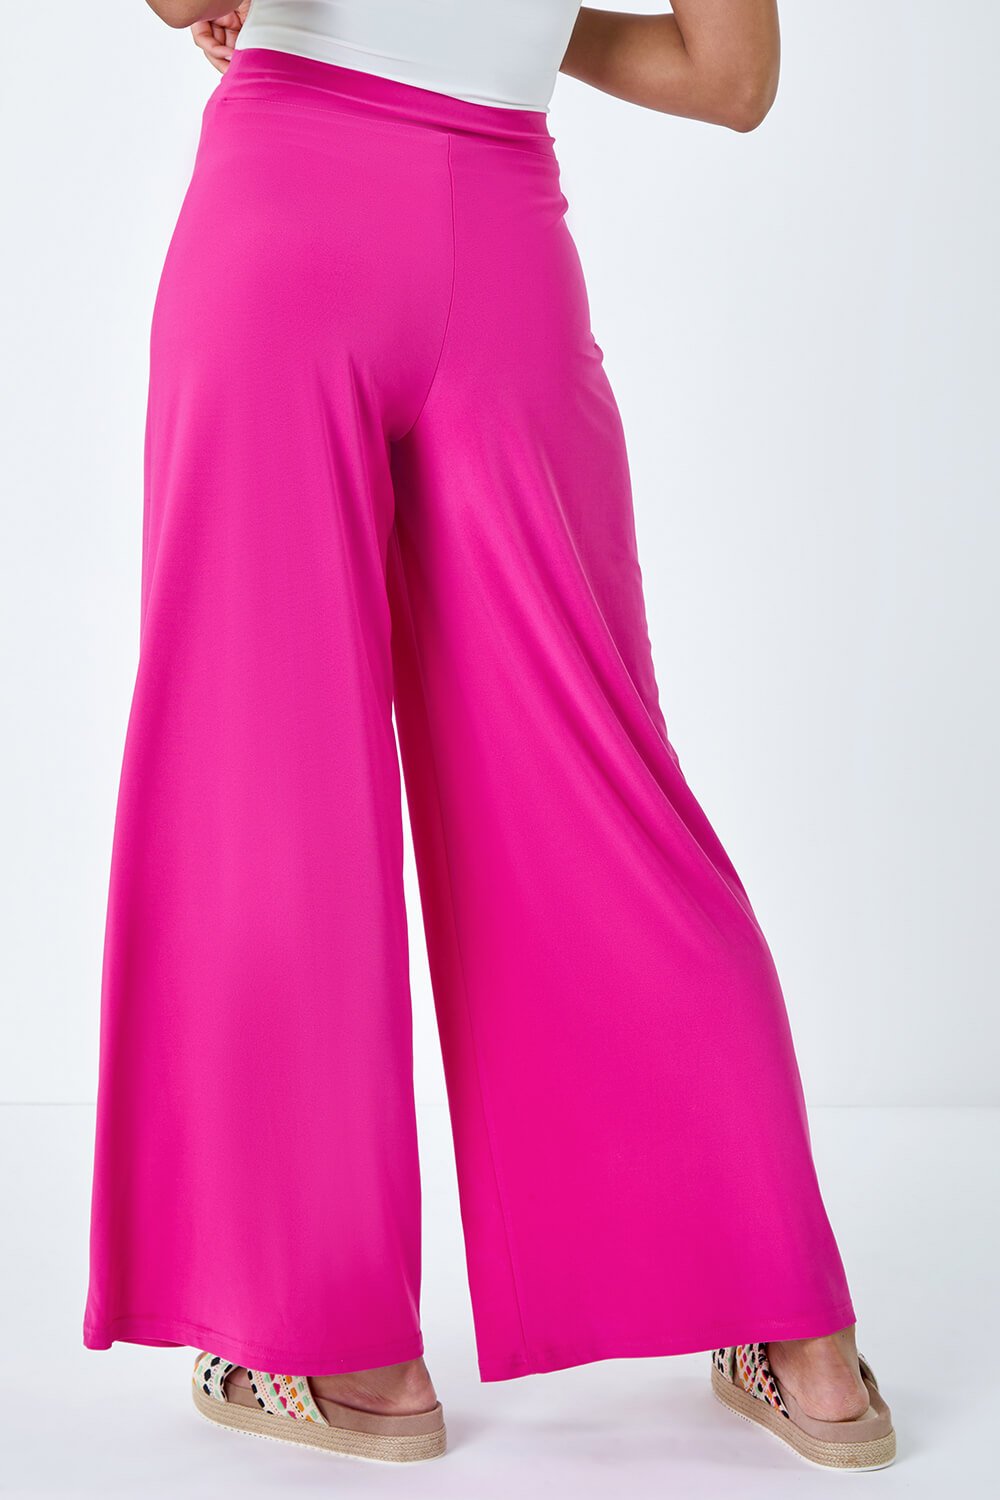 PINK Wide Leg Stretch Trousers, Image 3 of 5